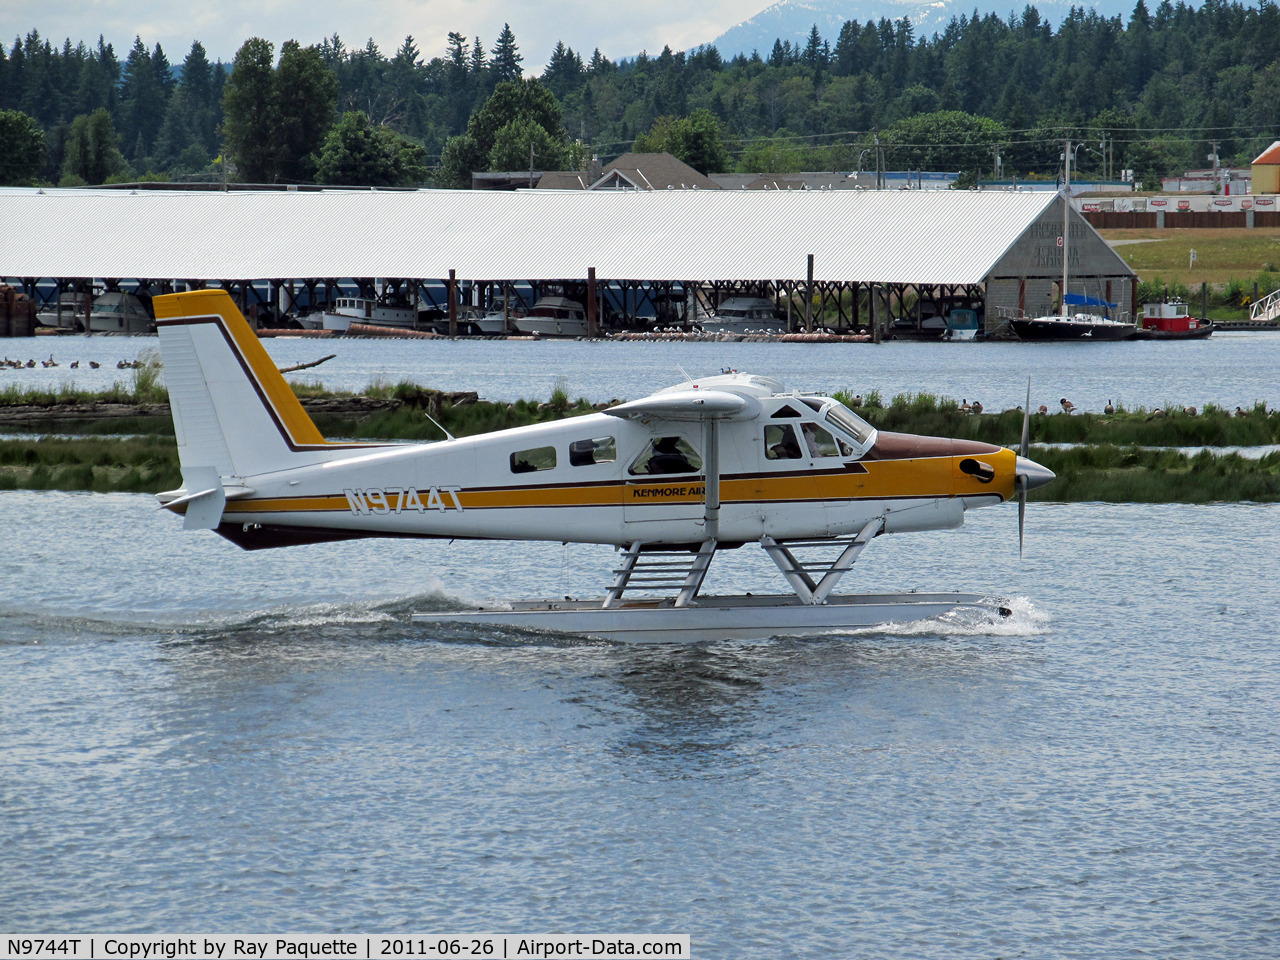 N9744T, 1968 De Havilland Canada DHC-2 Beaver Mk.3 C/N 1692, Preparing for take-off from The Campbell River, BC Estuary.